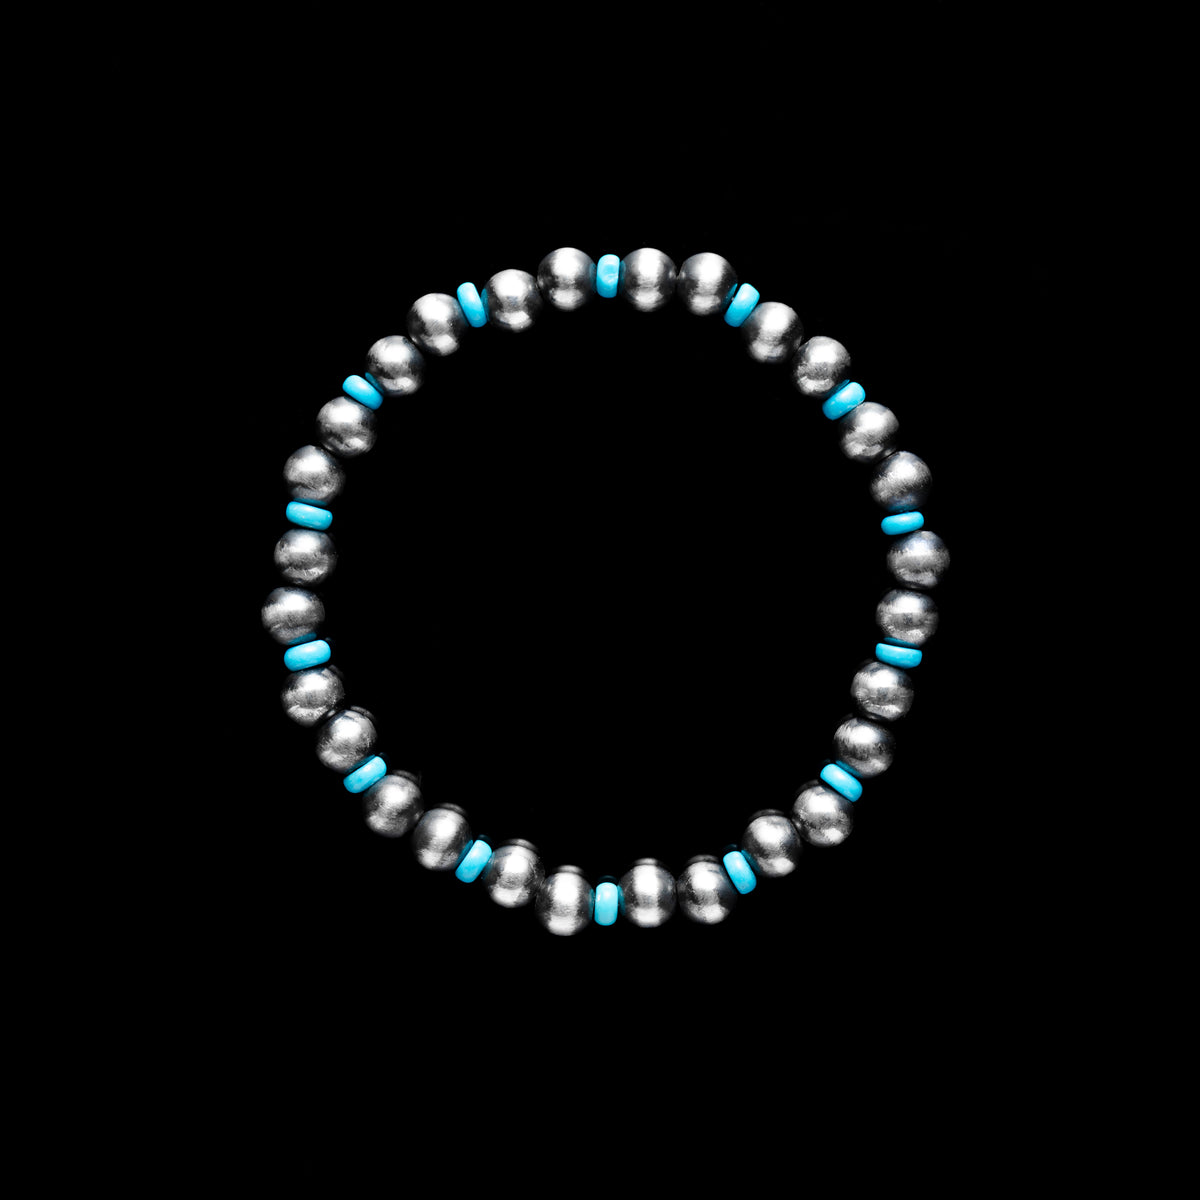 Santa Fe Pearl Stretch Bracelet with Turquoise- 6mm